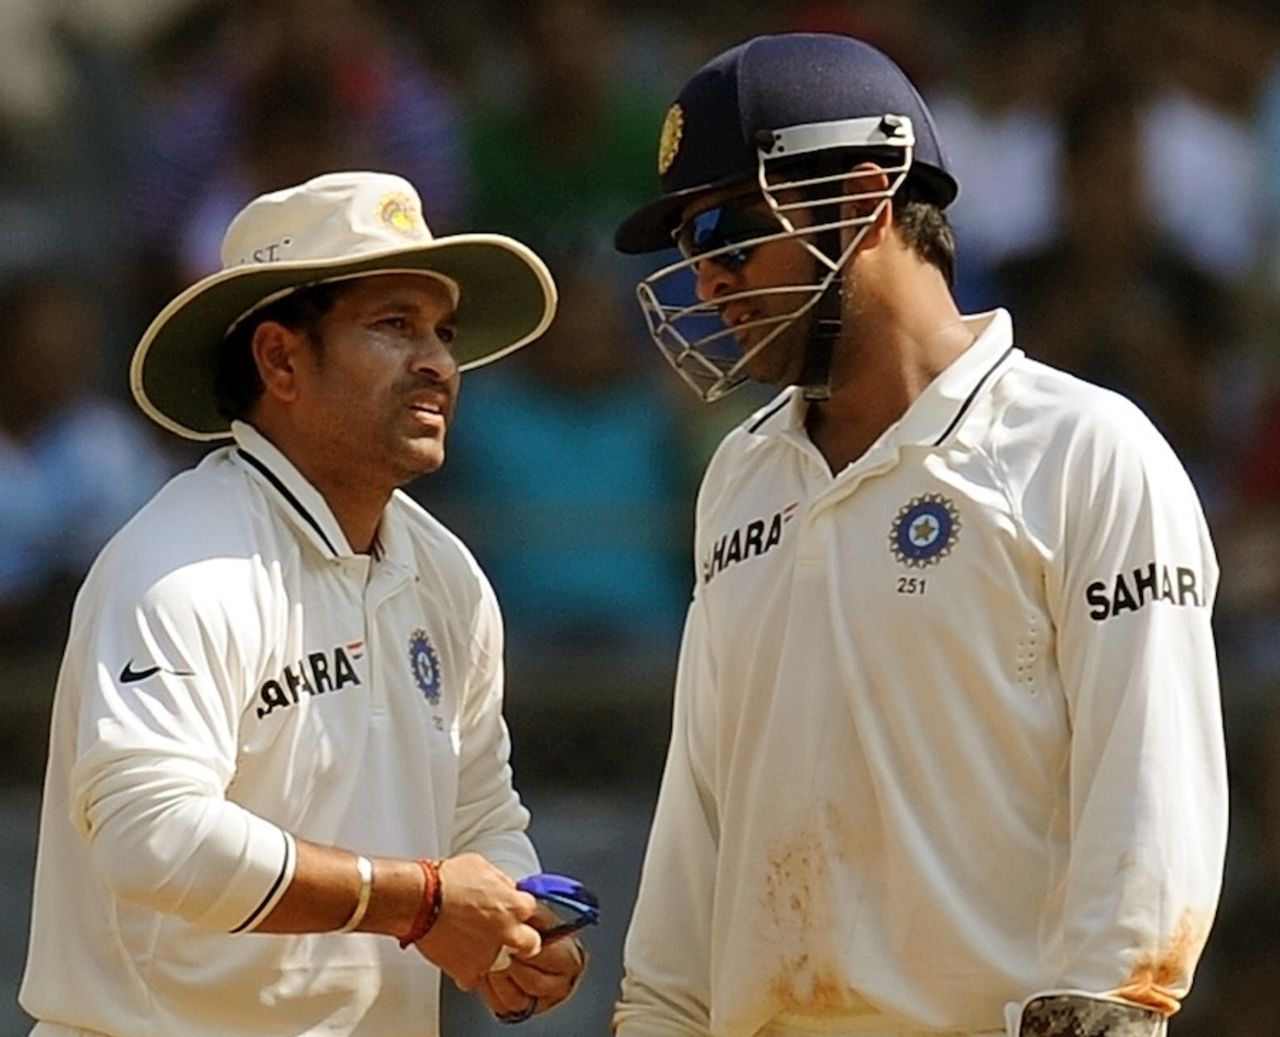 MS Dhoni has a chat with Sachin Tendulkar, India v West Indies, 3rd Test, Mumbai, 2nd day, November 23, 2011